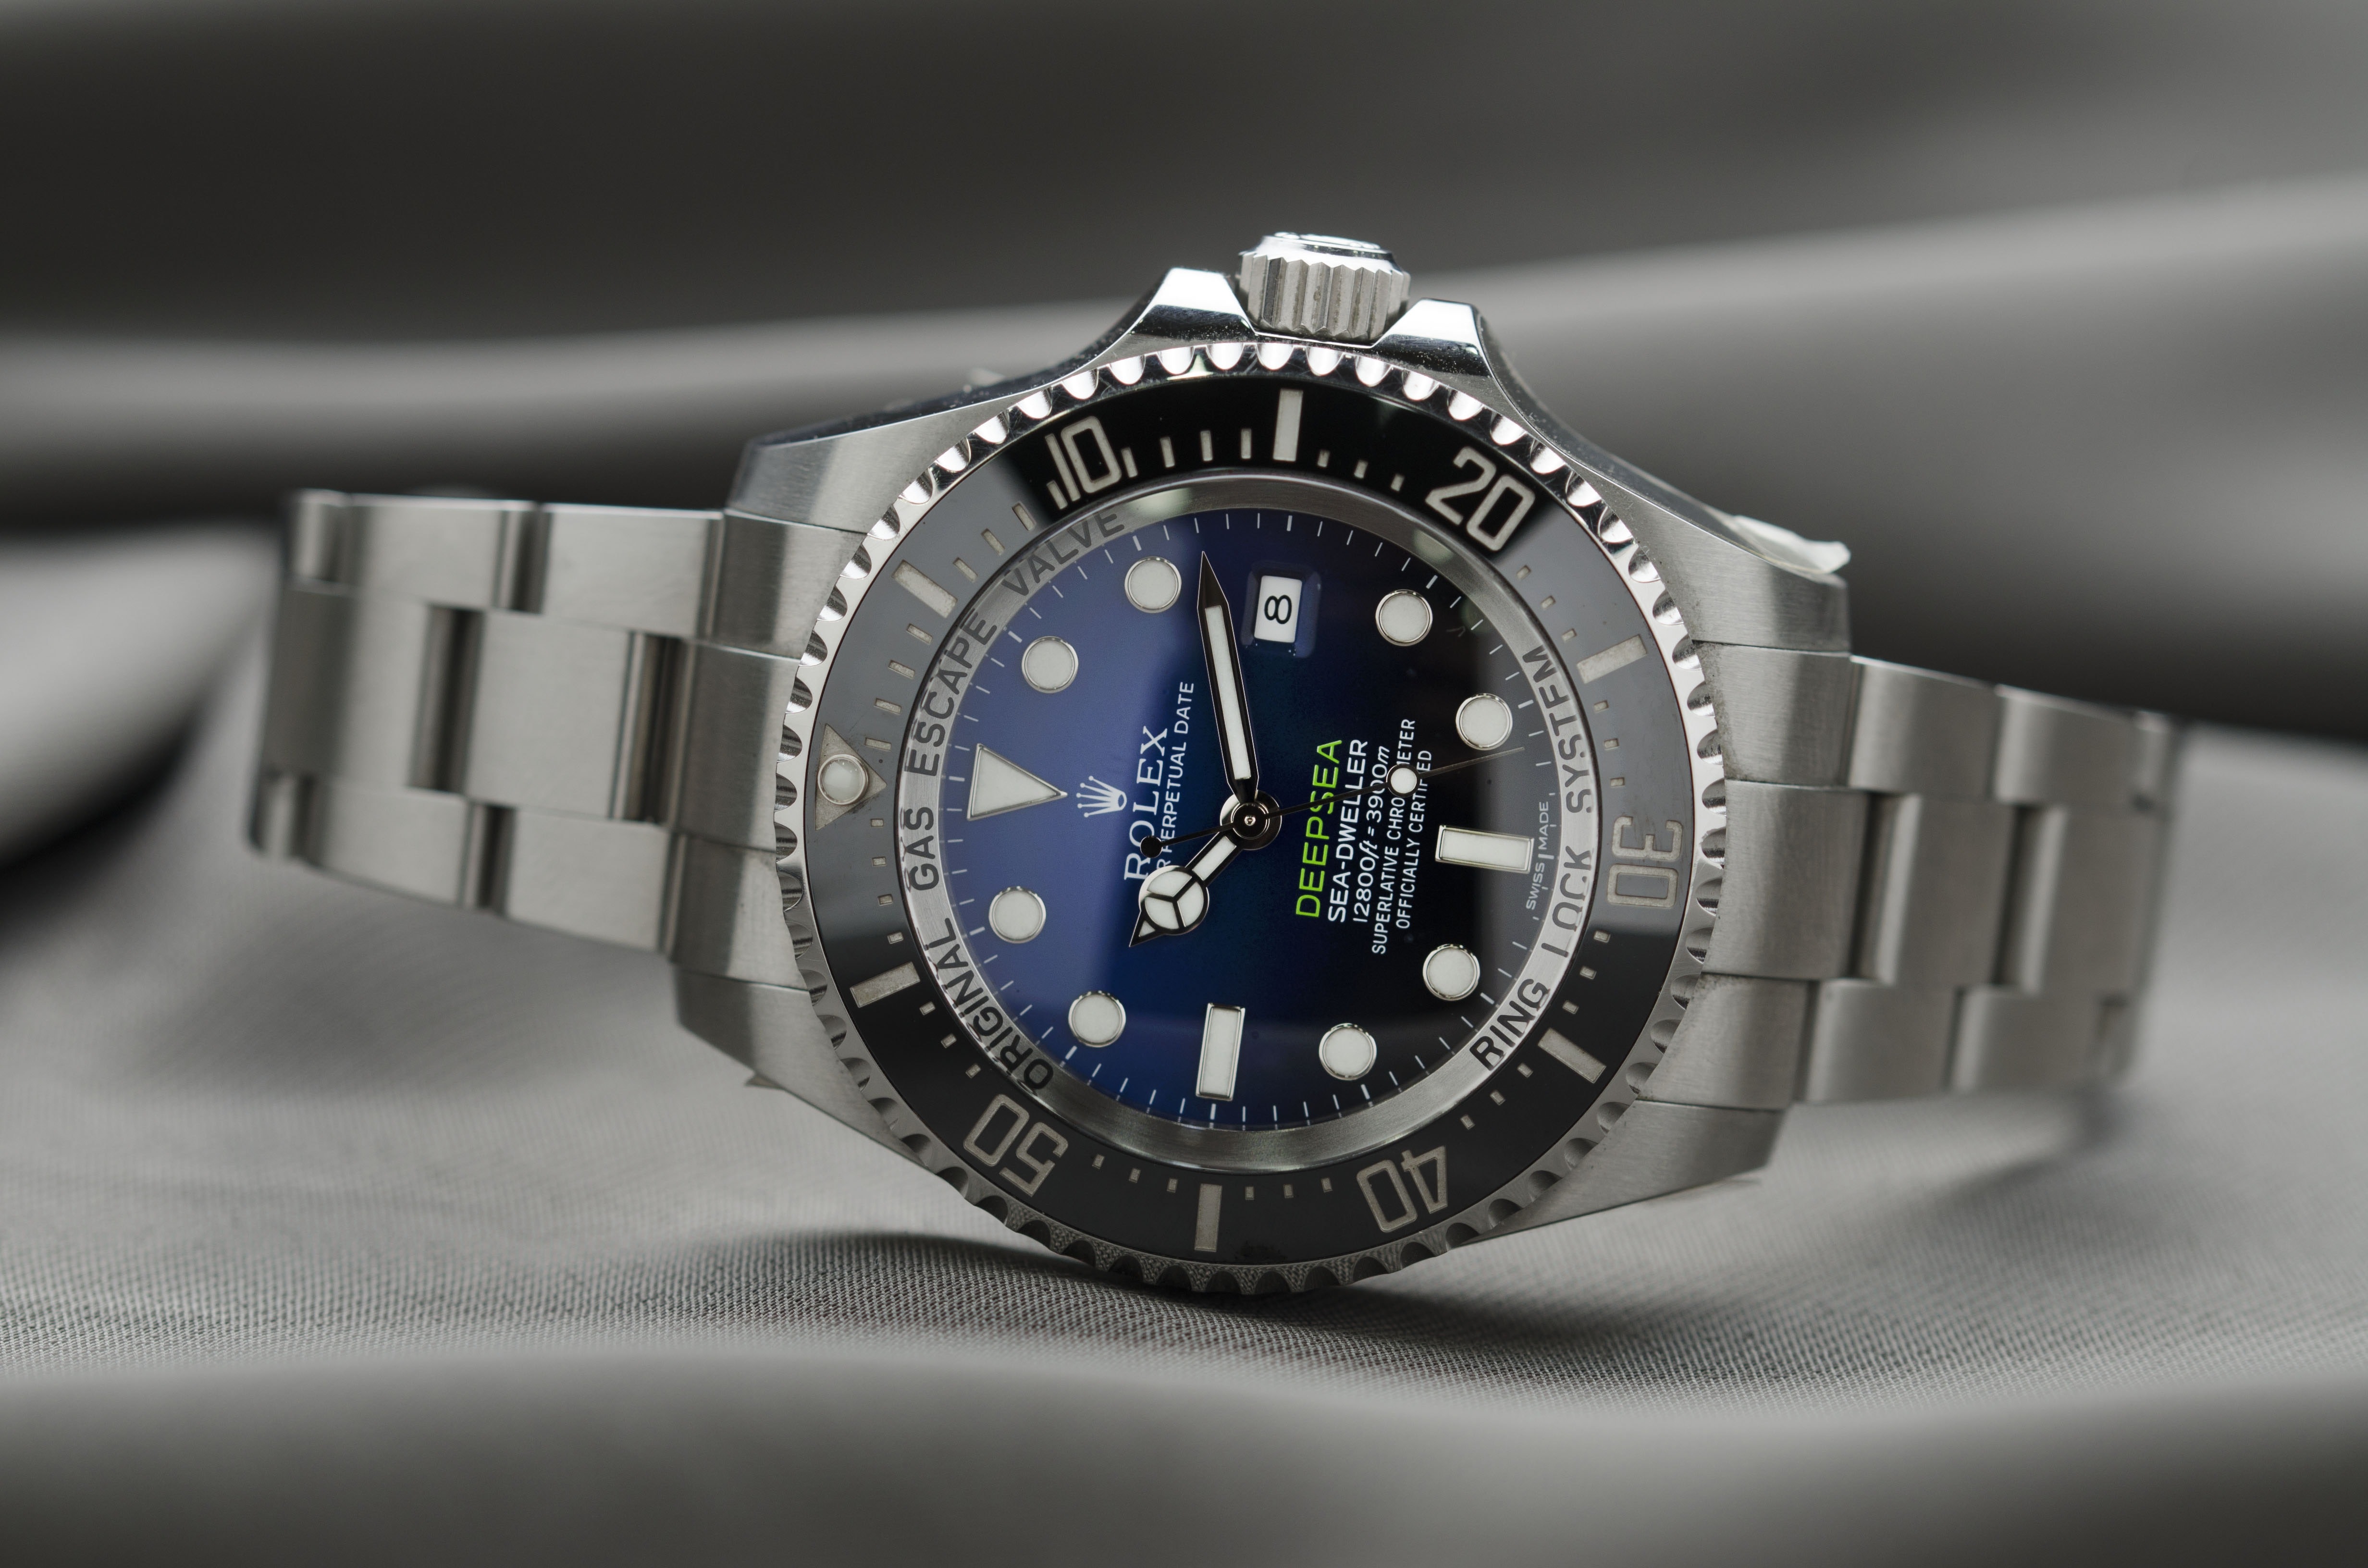 Qualities of a Divers Watch